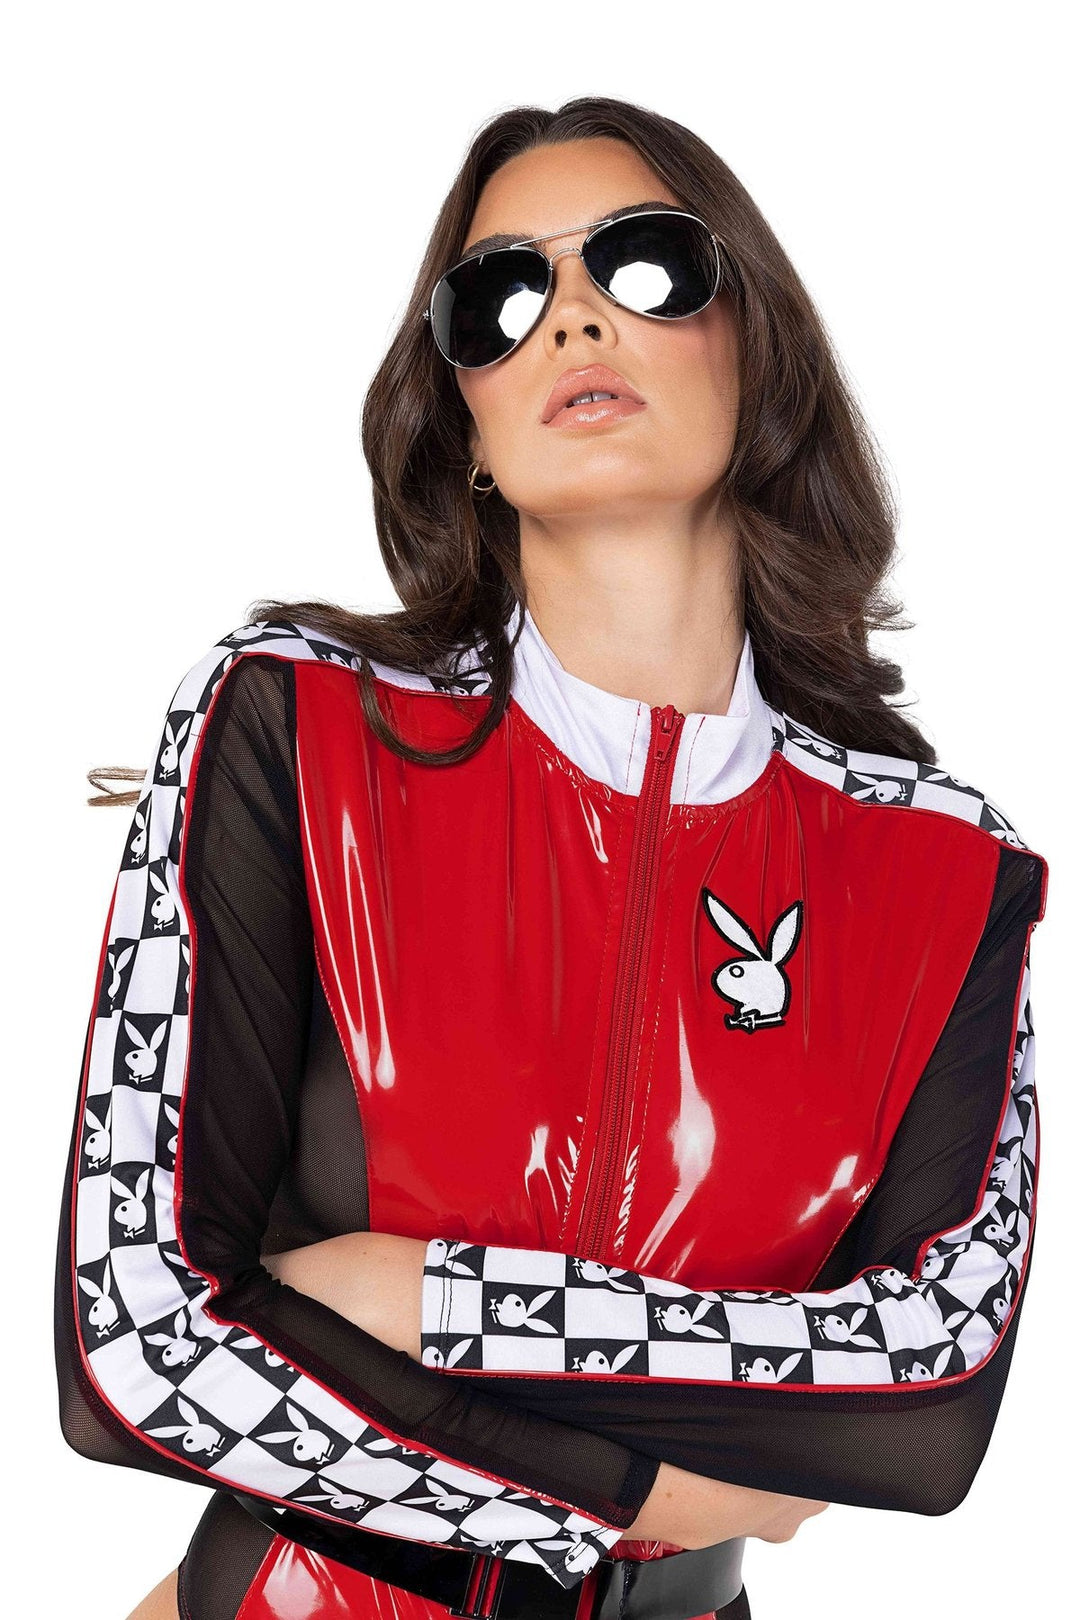 Playboy Racecar Driver Costume-Racer Costumes-Roma Costumes-SEXYSHOES.COM